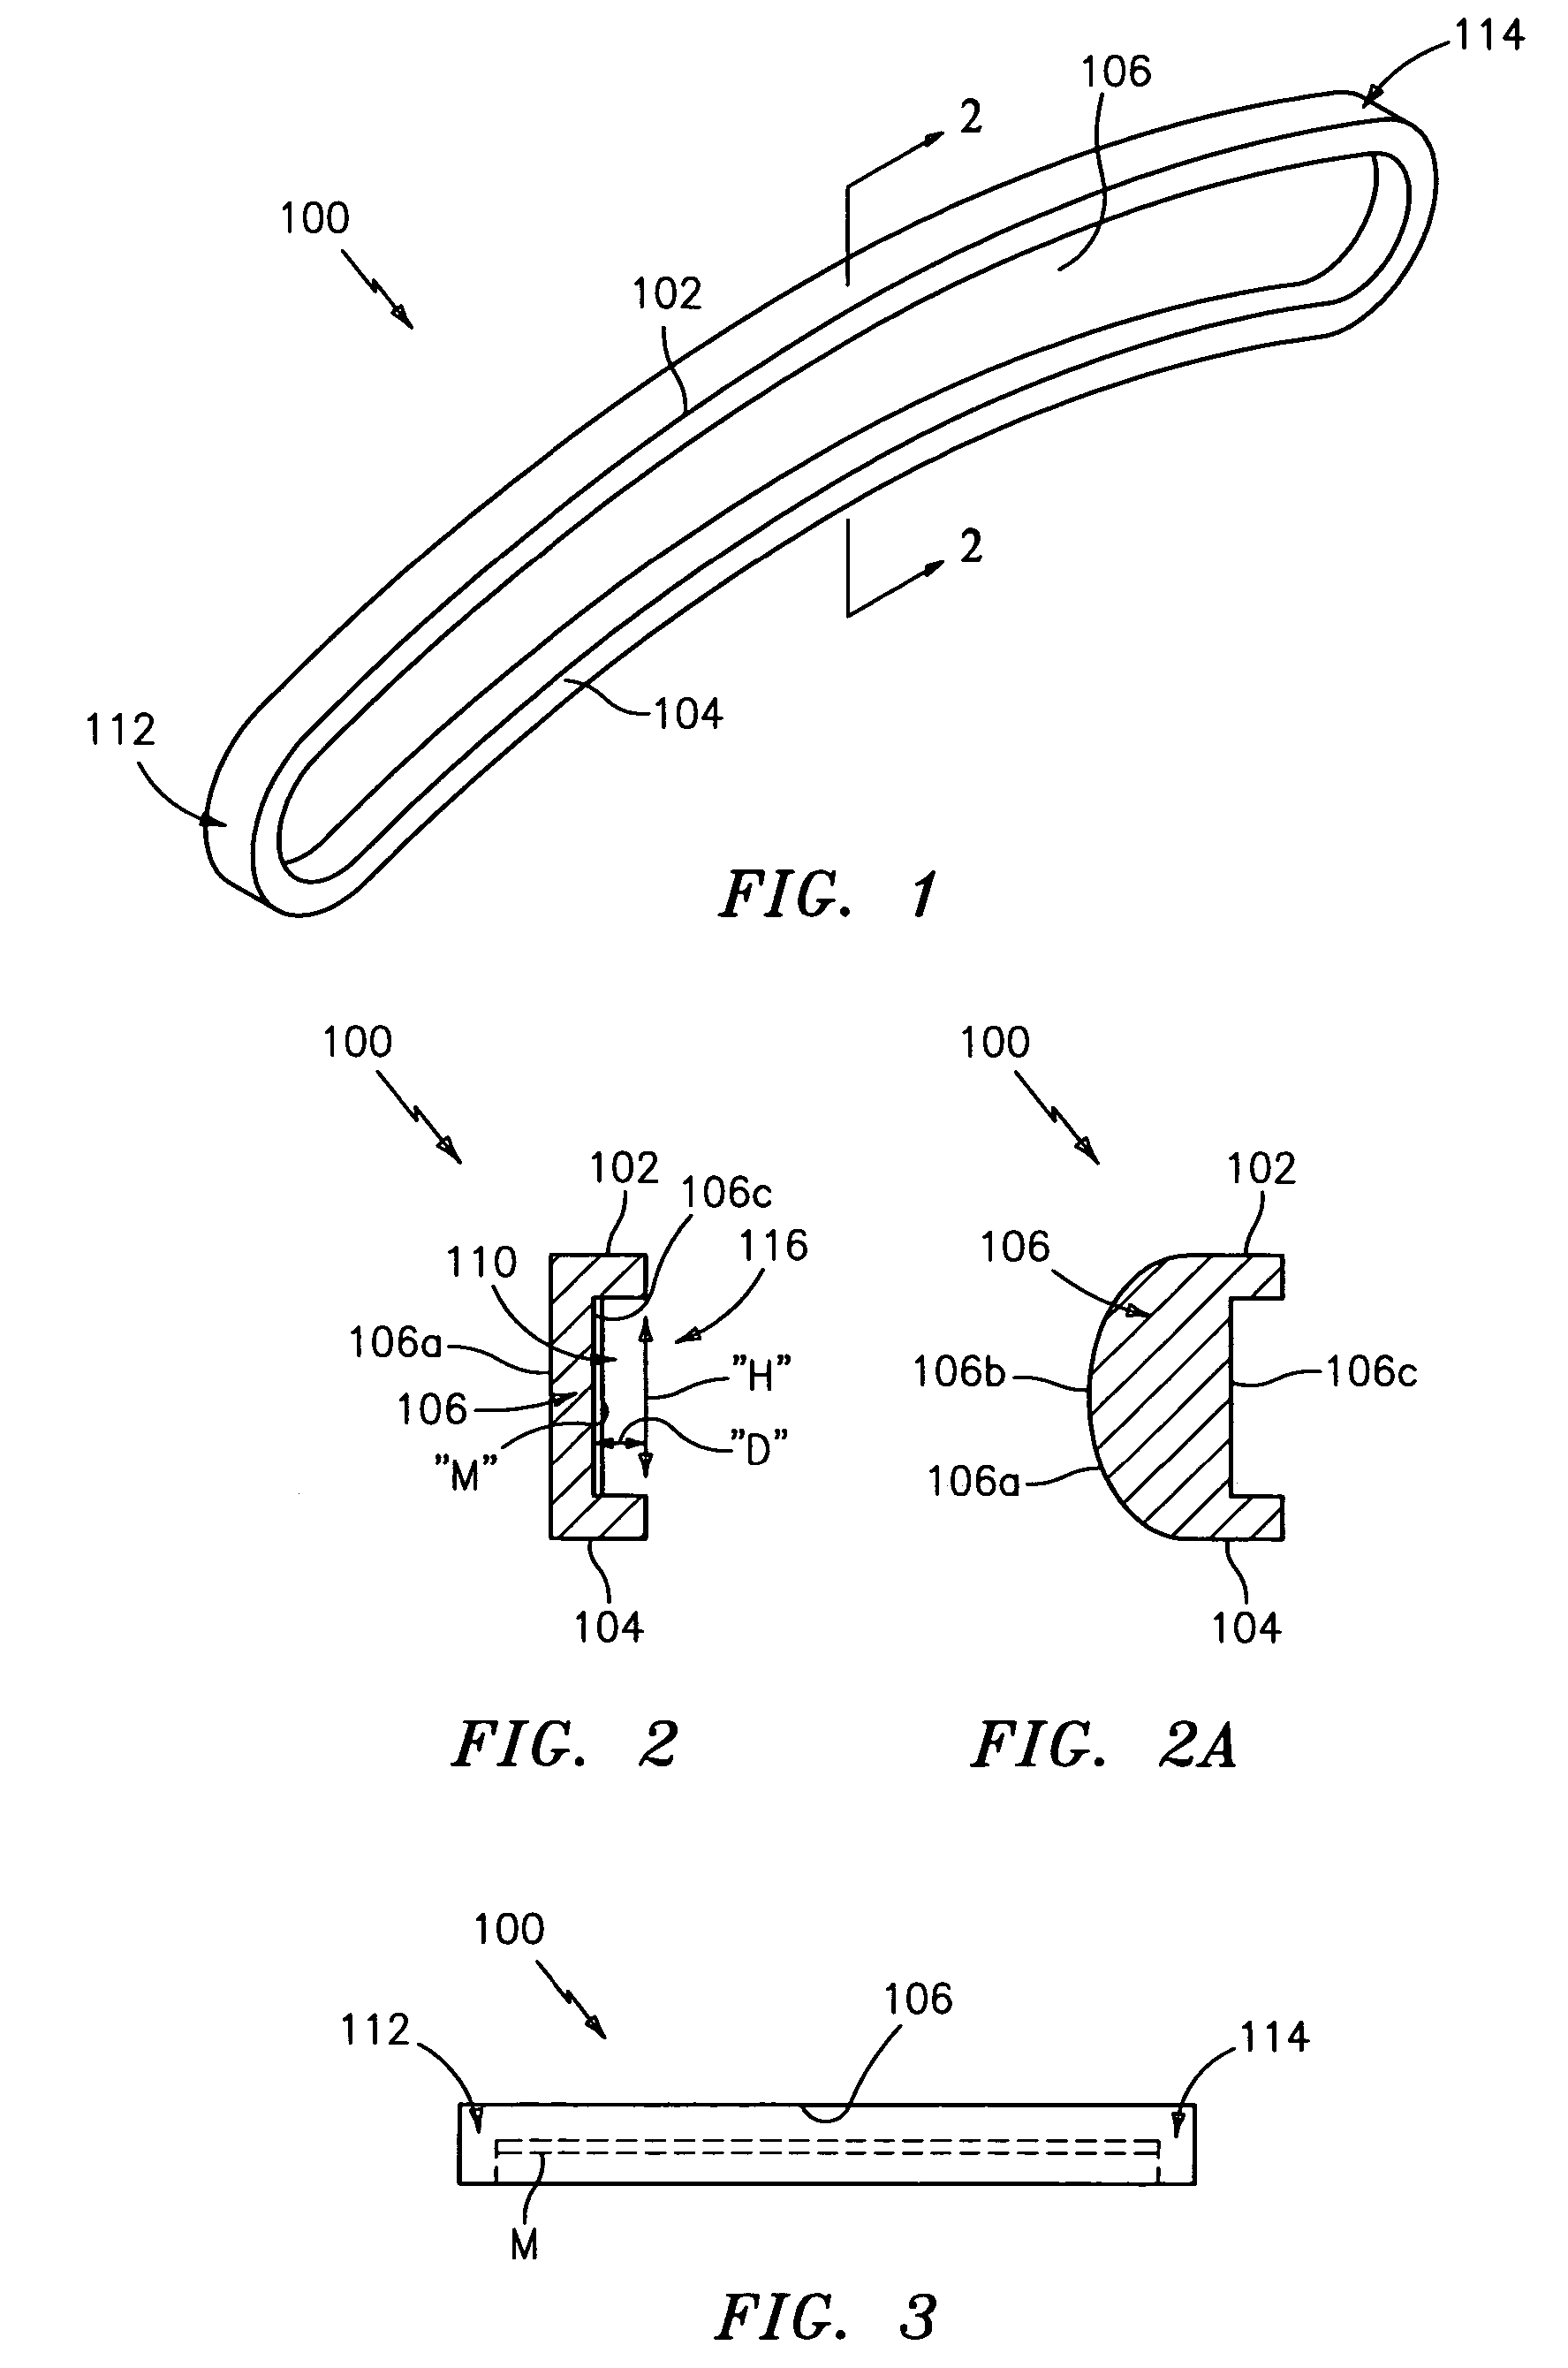 Methods and devices for minimizing the loss of blood through a severed sternum during cardiac and/or thoracic surgery